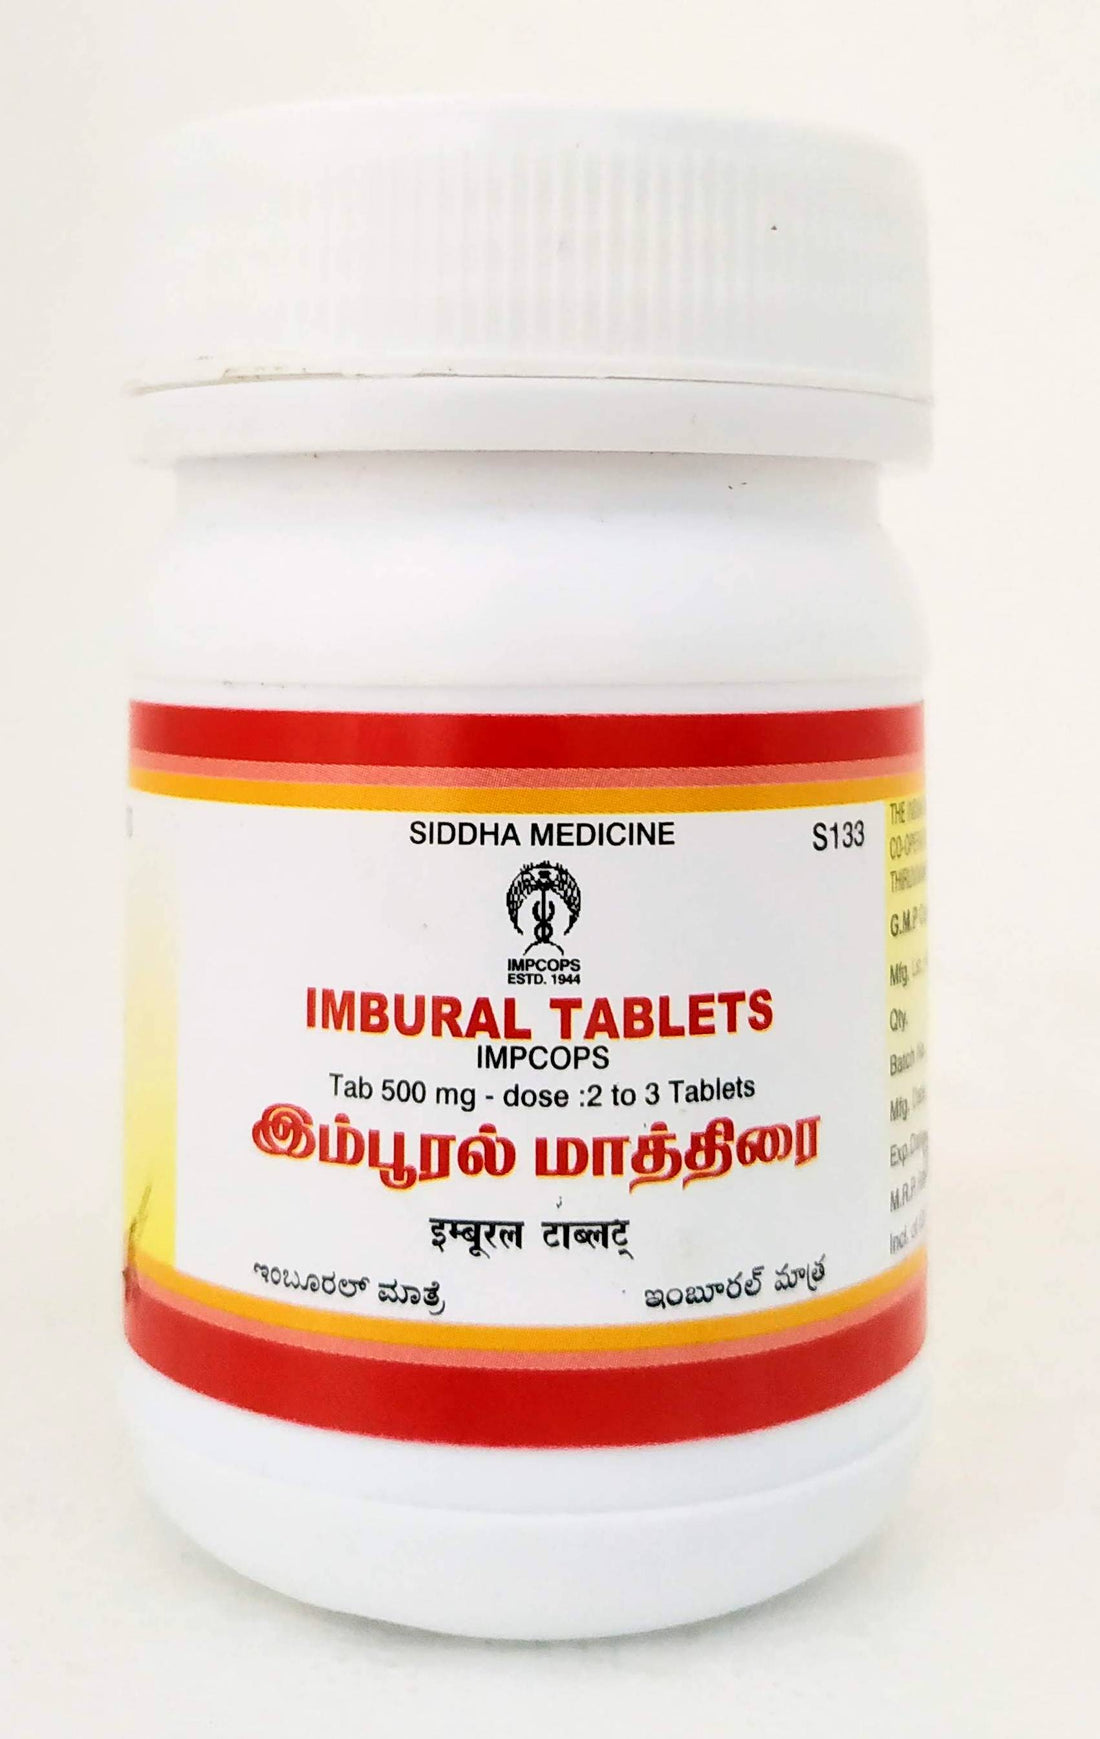 Shop Imbural Tablets - 100Tablets at price 95.00 from Impcops Online - Ayush Care